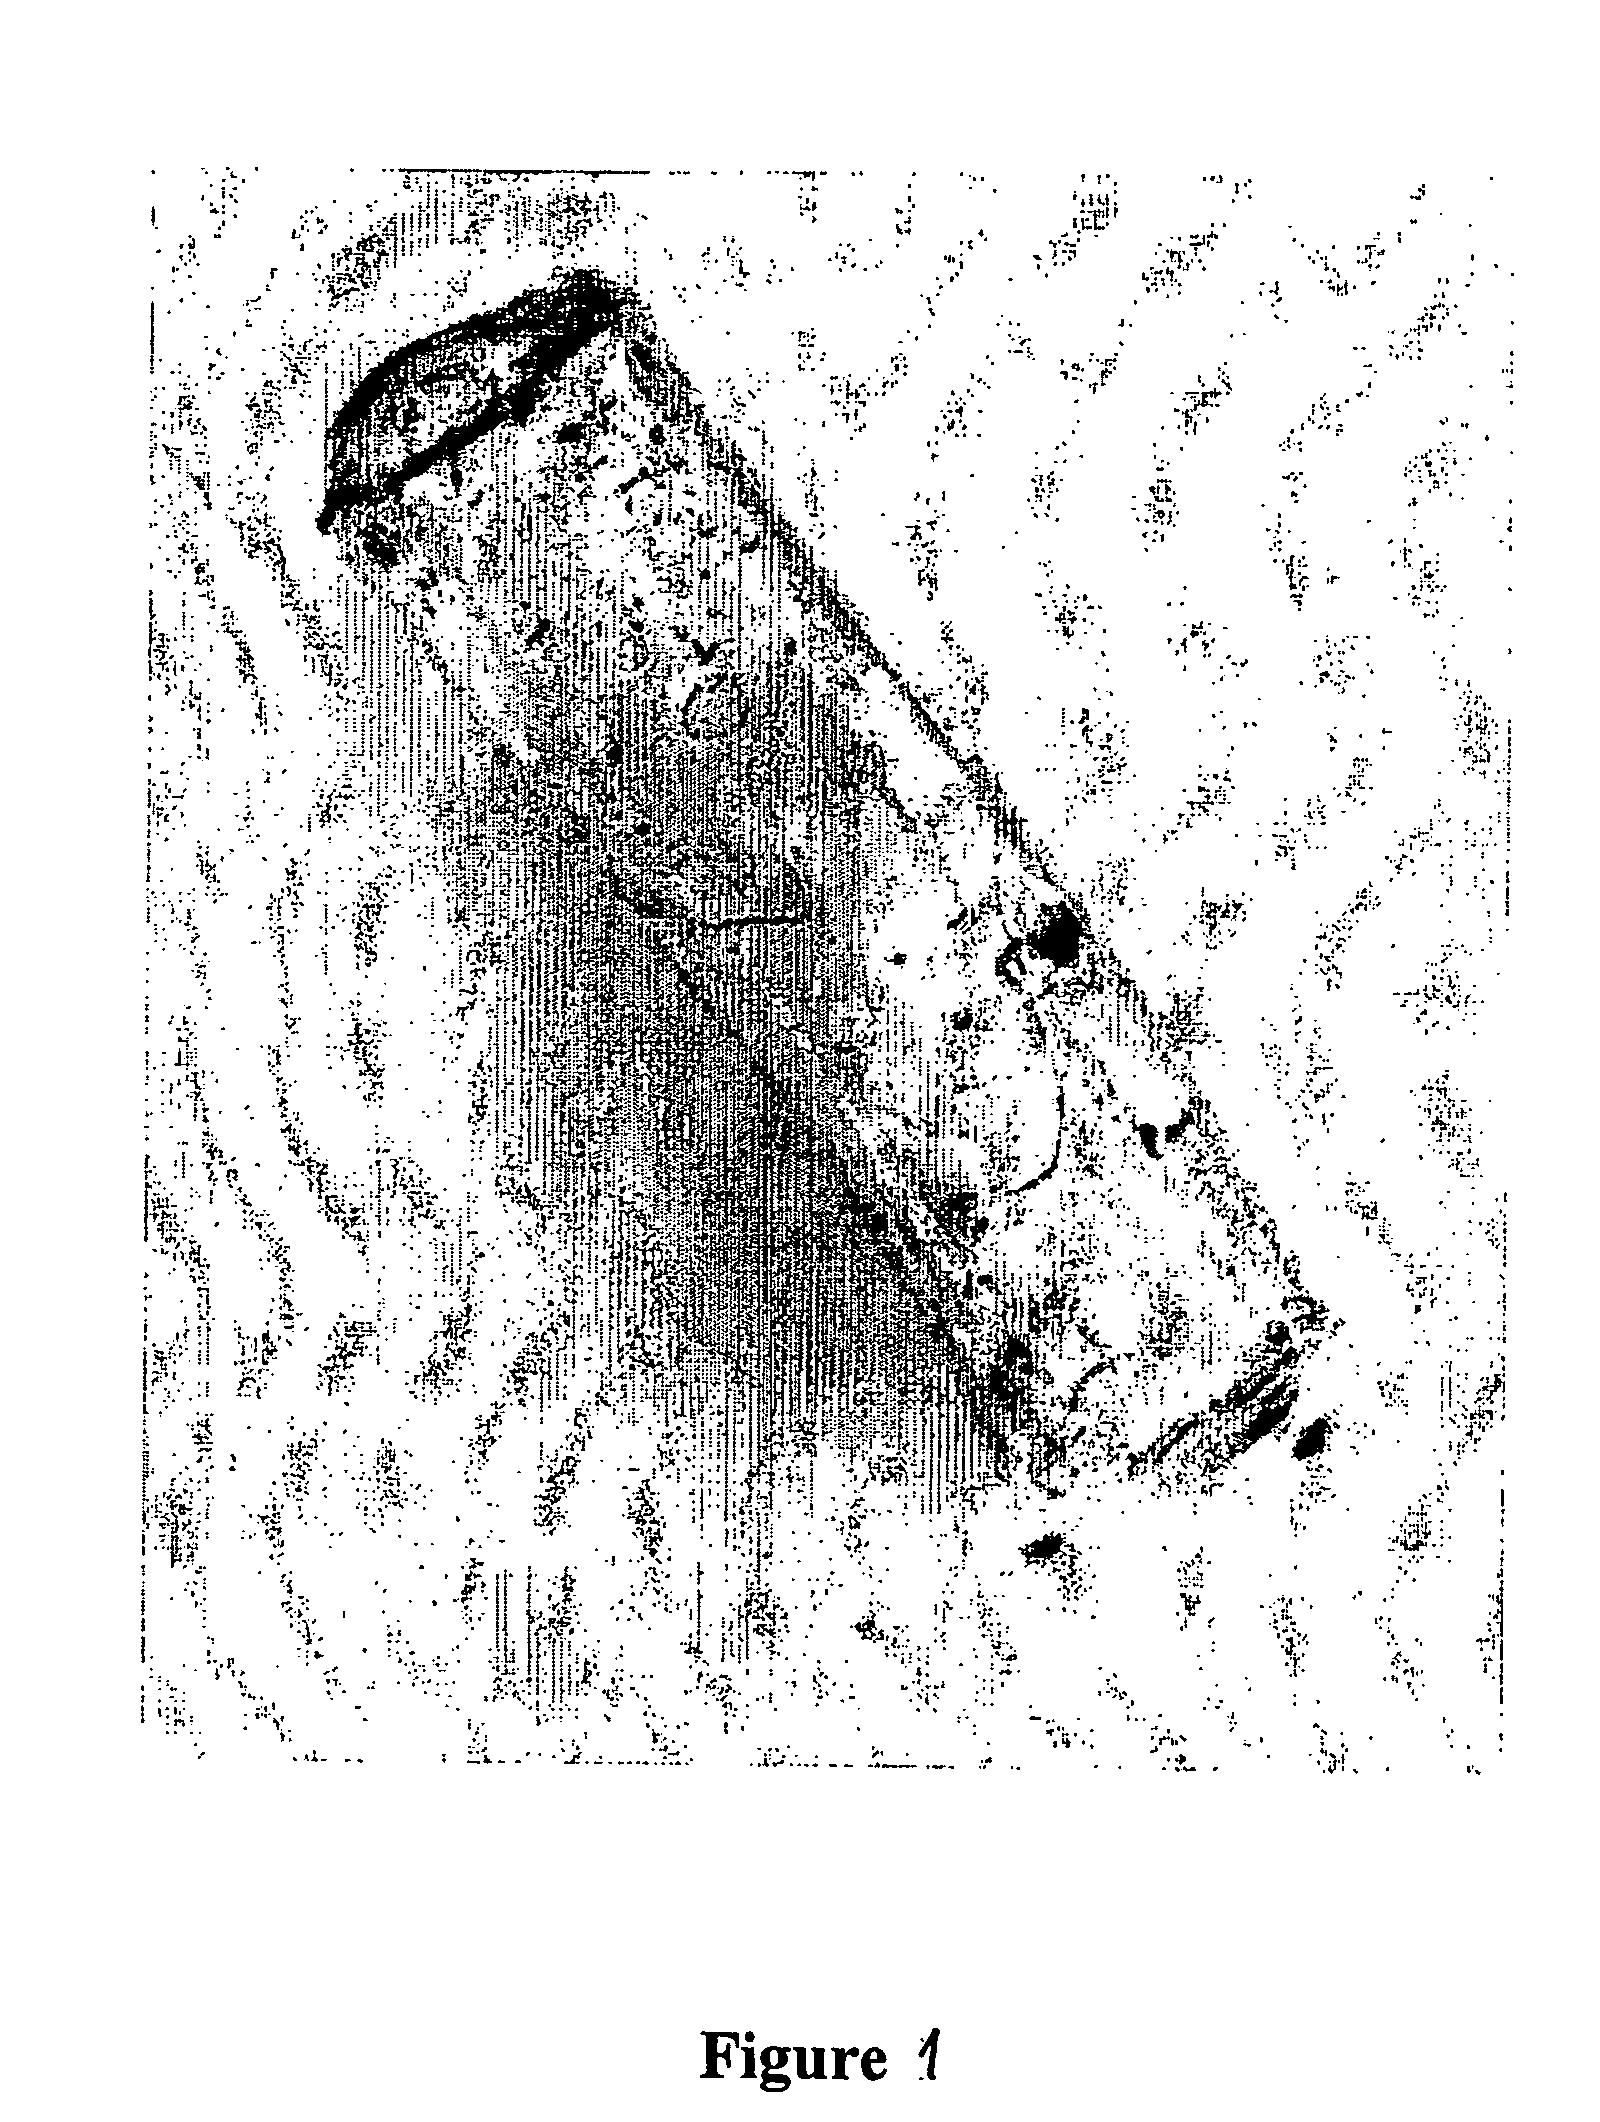 Cohesive coprecipitates of sulfated polysaccharide and fibrillar protein and use thereof